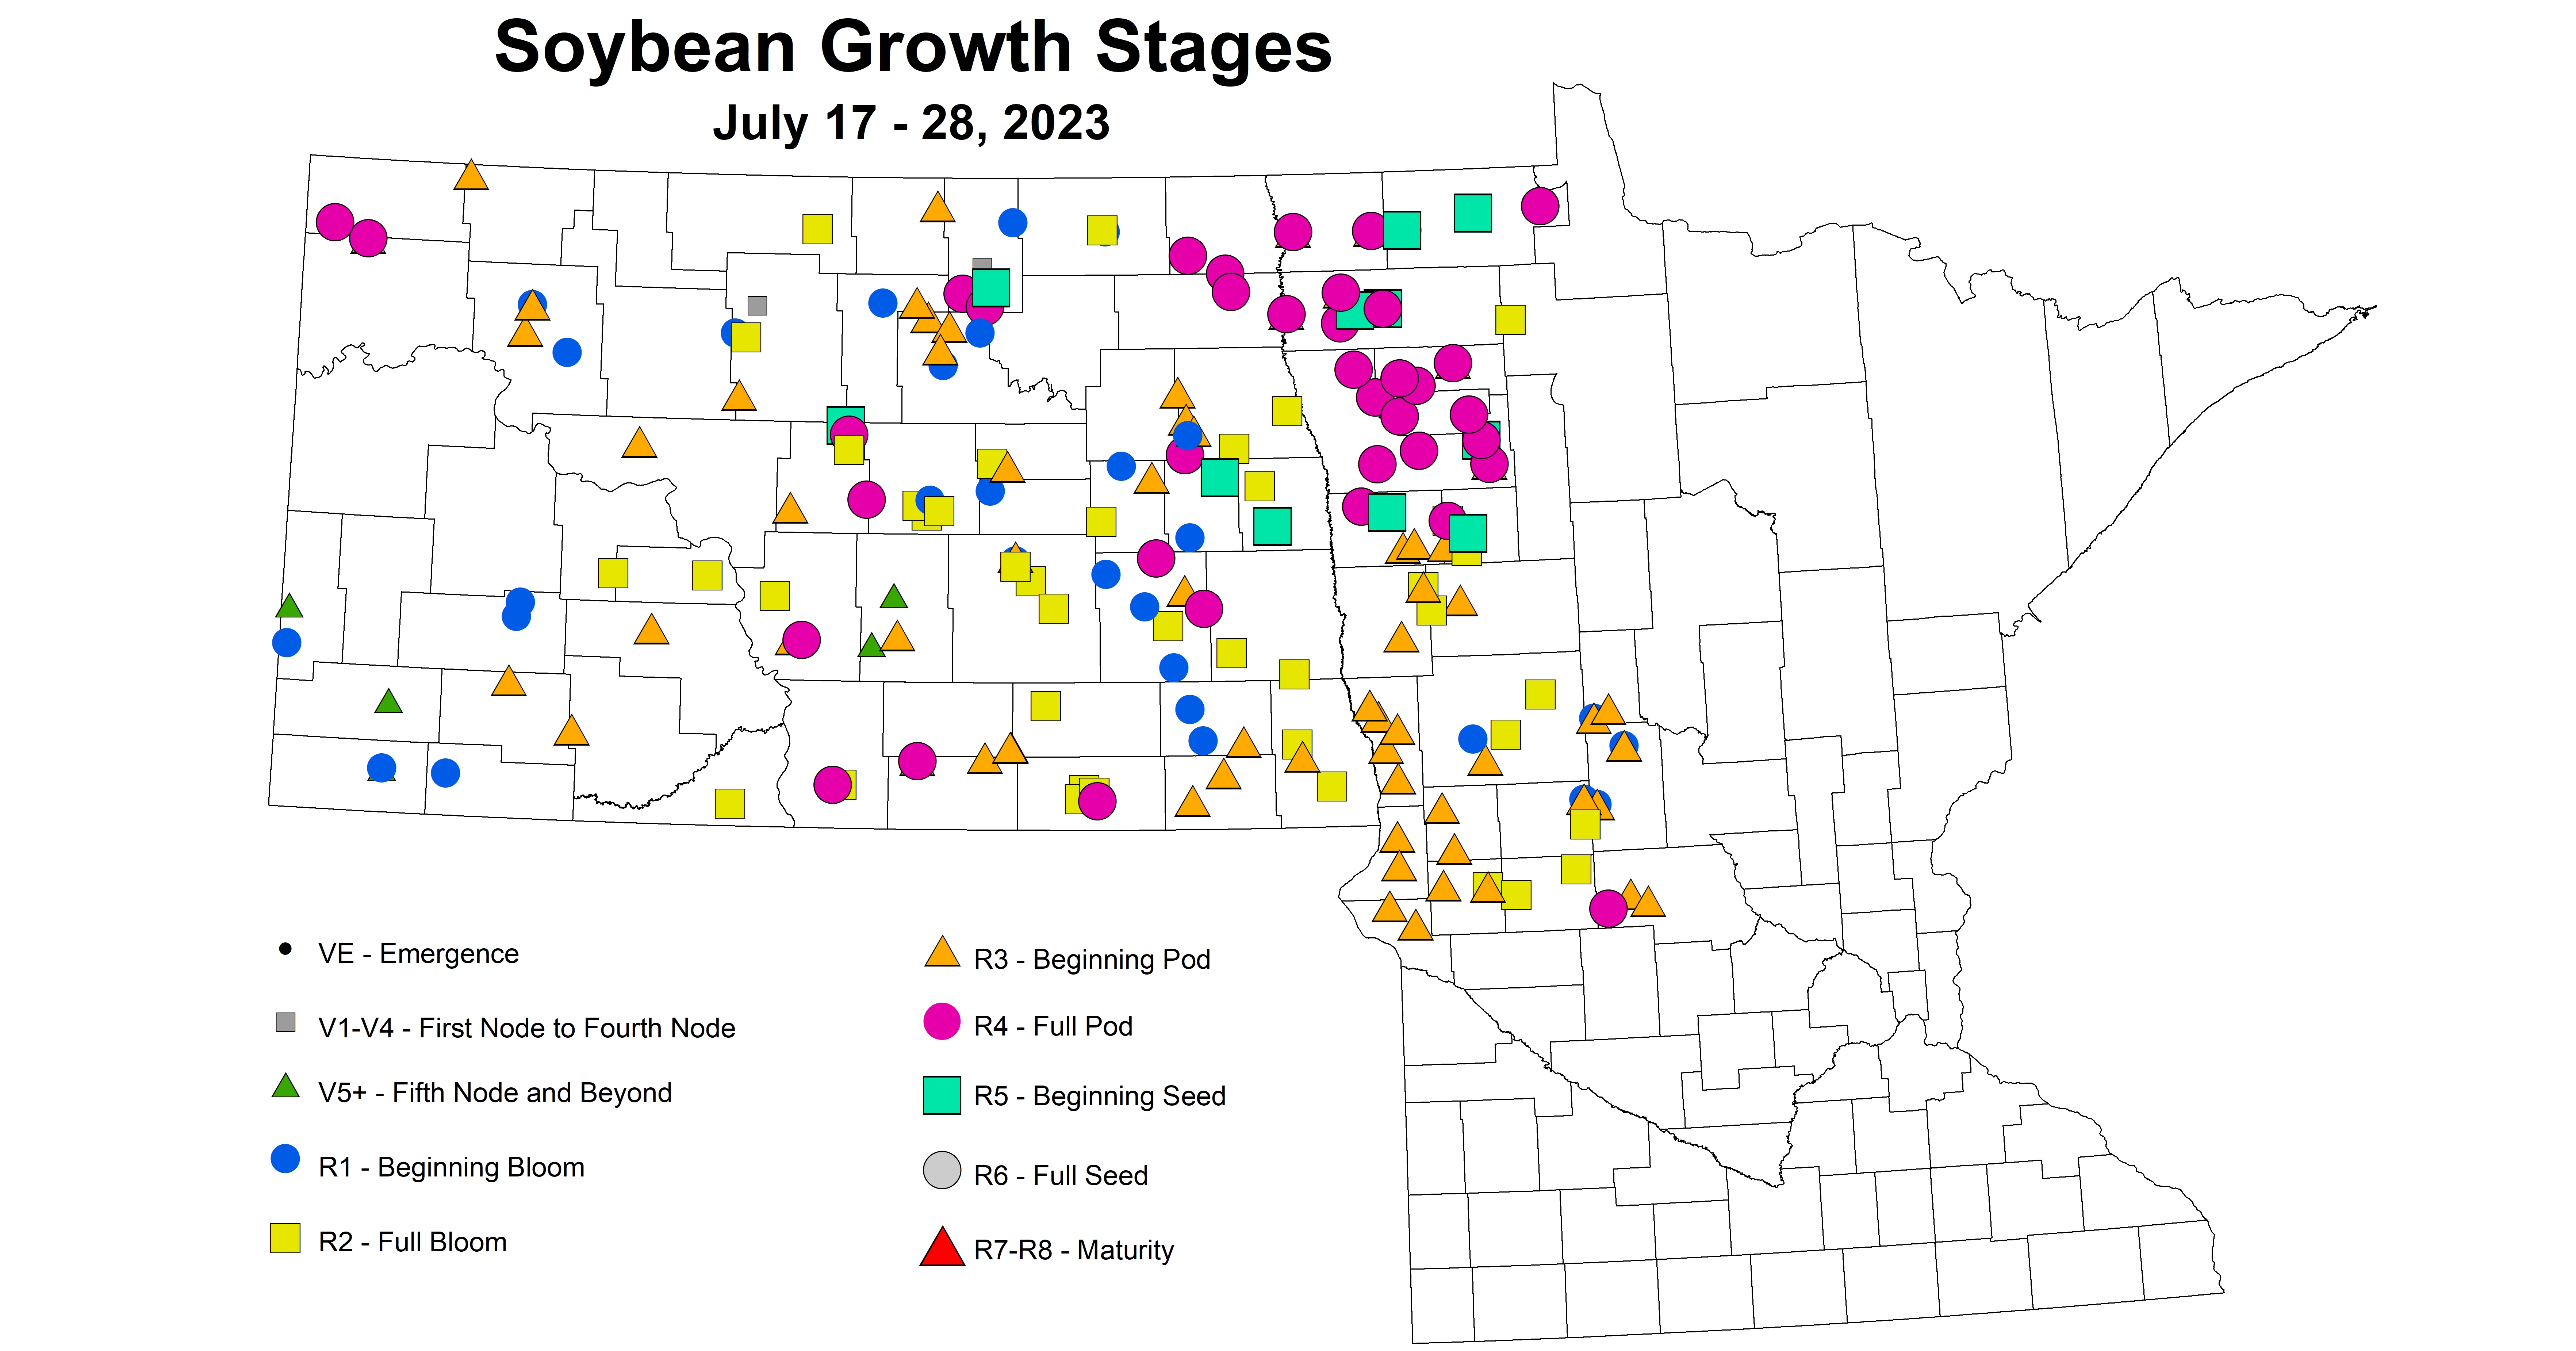 soybean growth stages July 17-28 2023